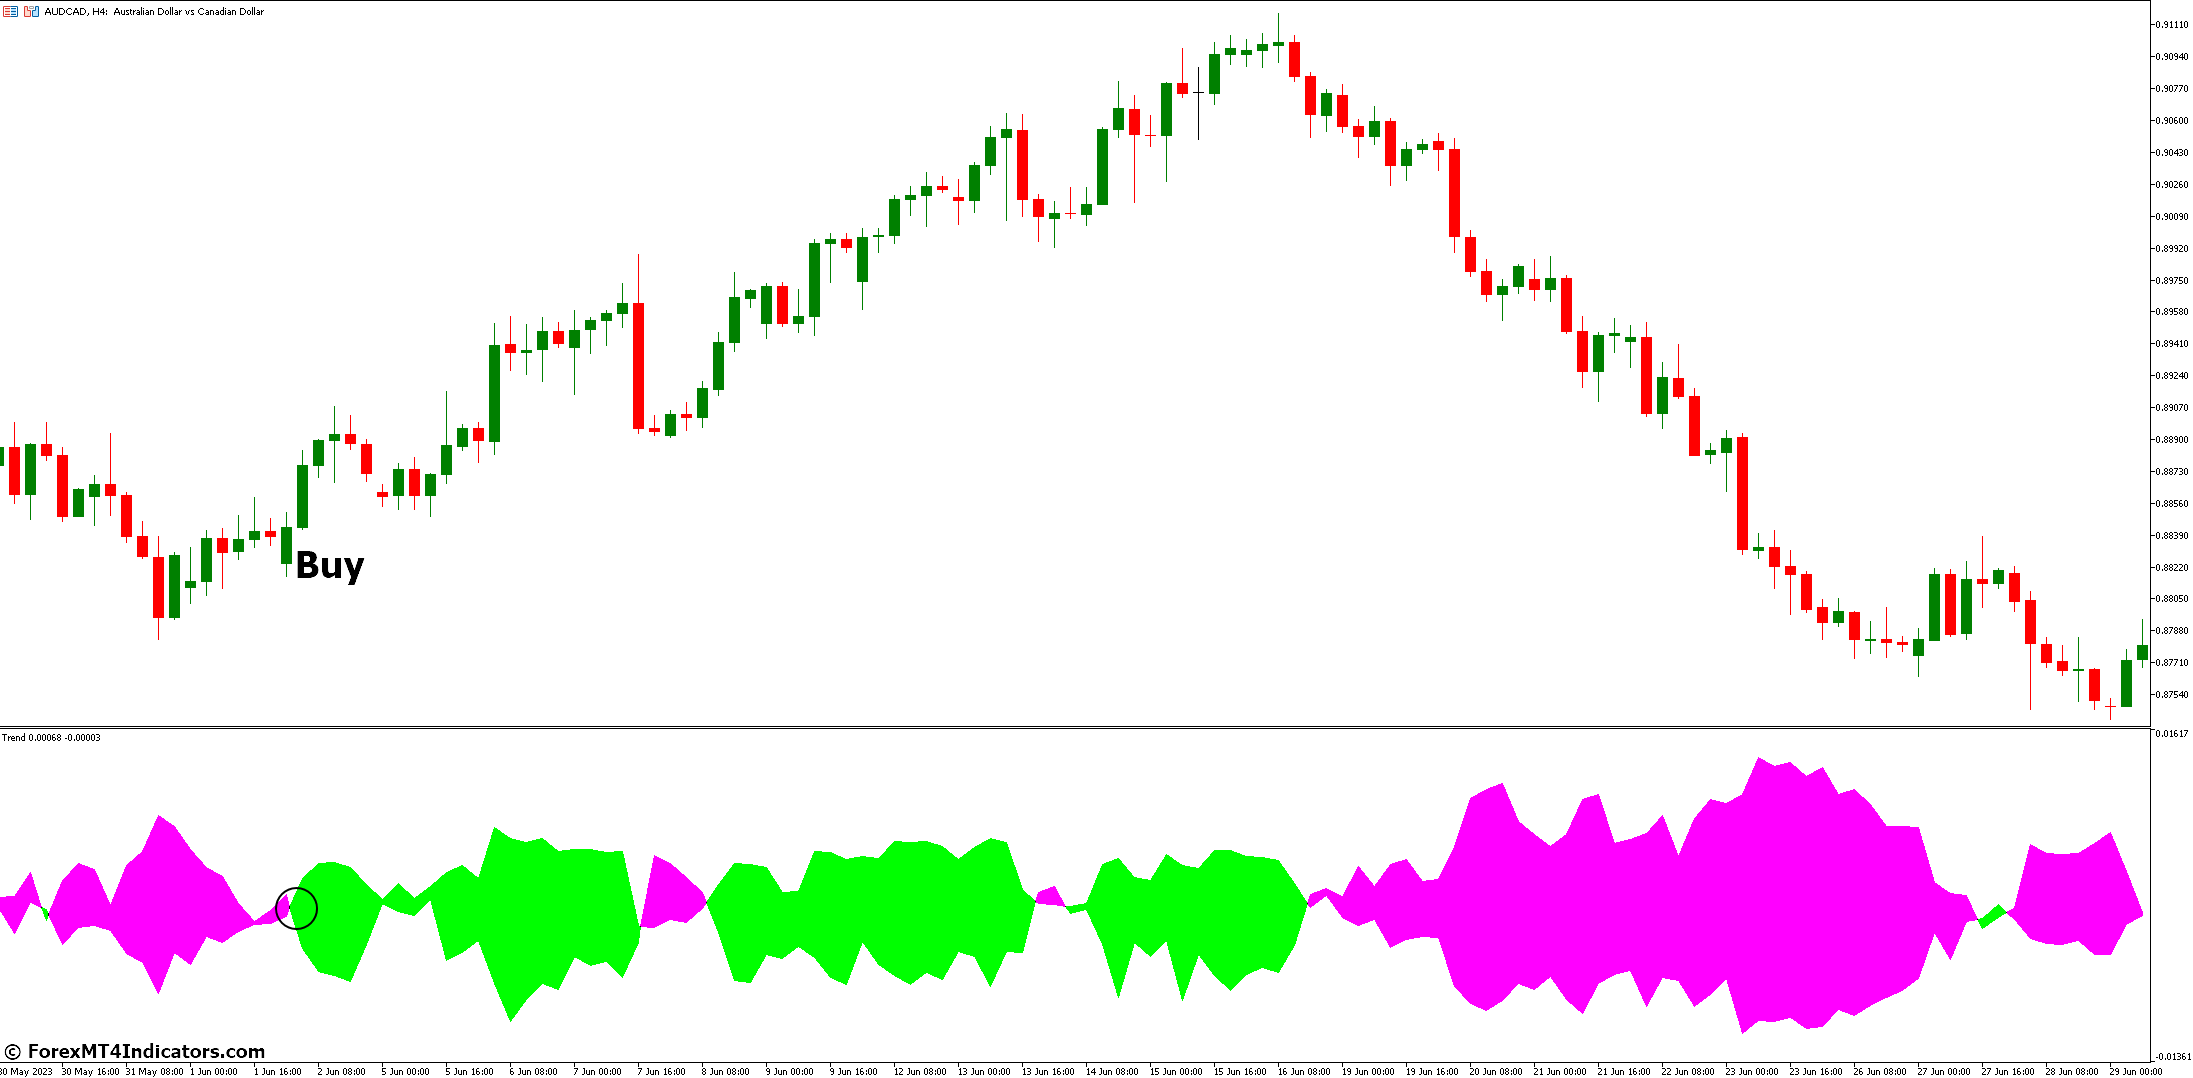 How to Trade with Trend Indicator - Buy Entry